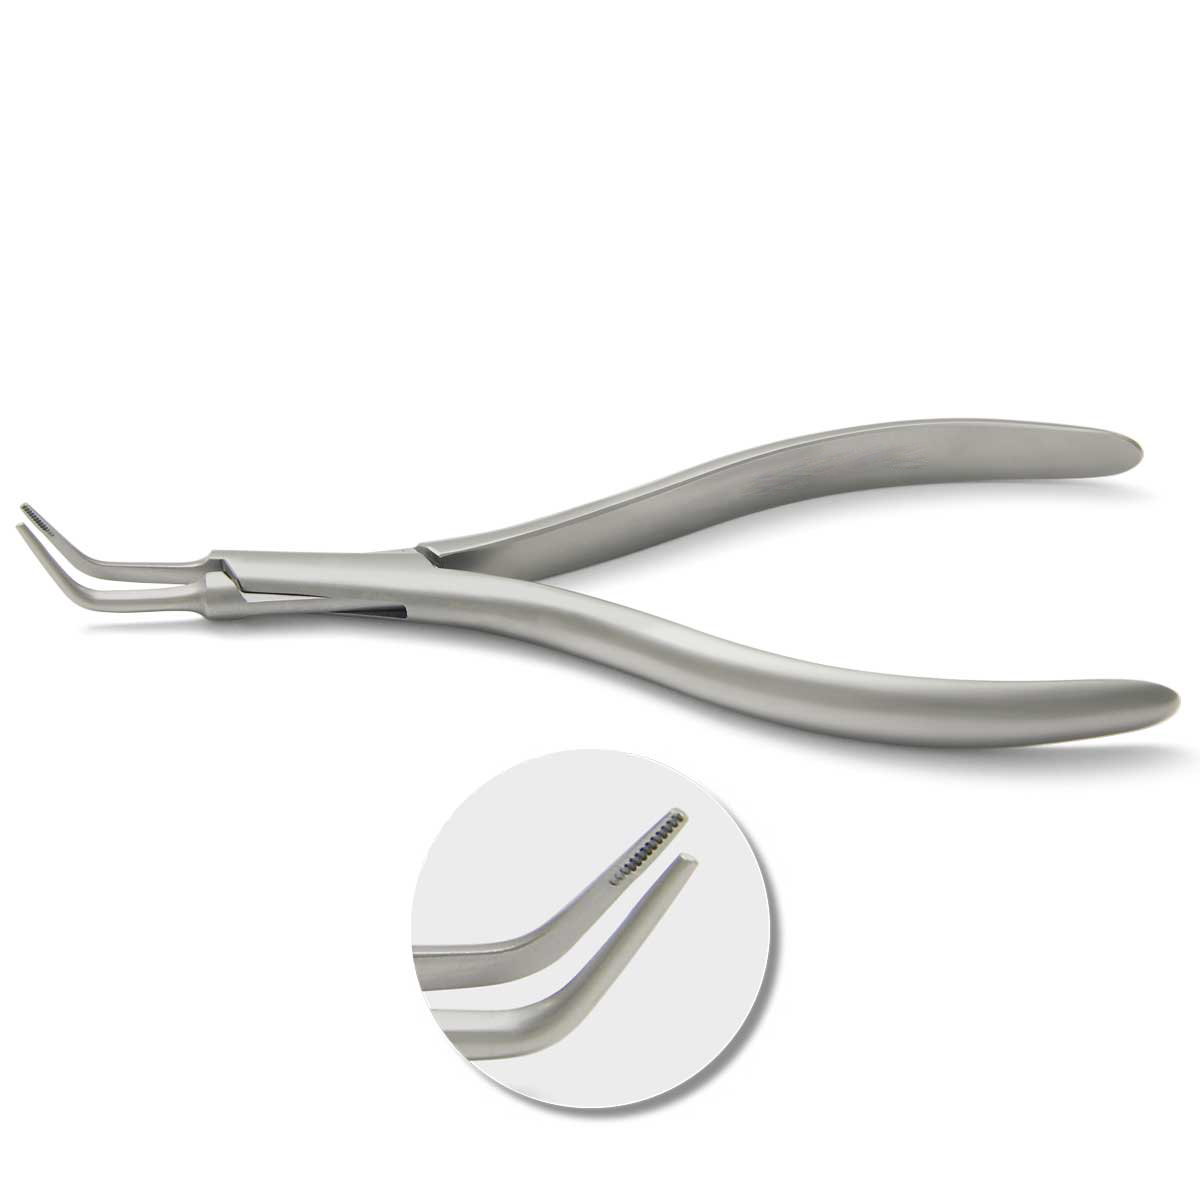 Pliers for removing broken broaches